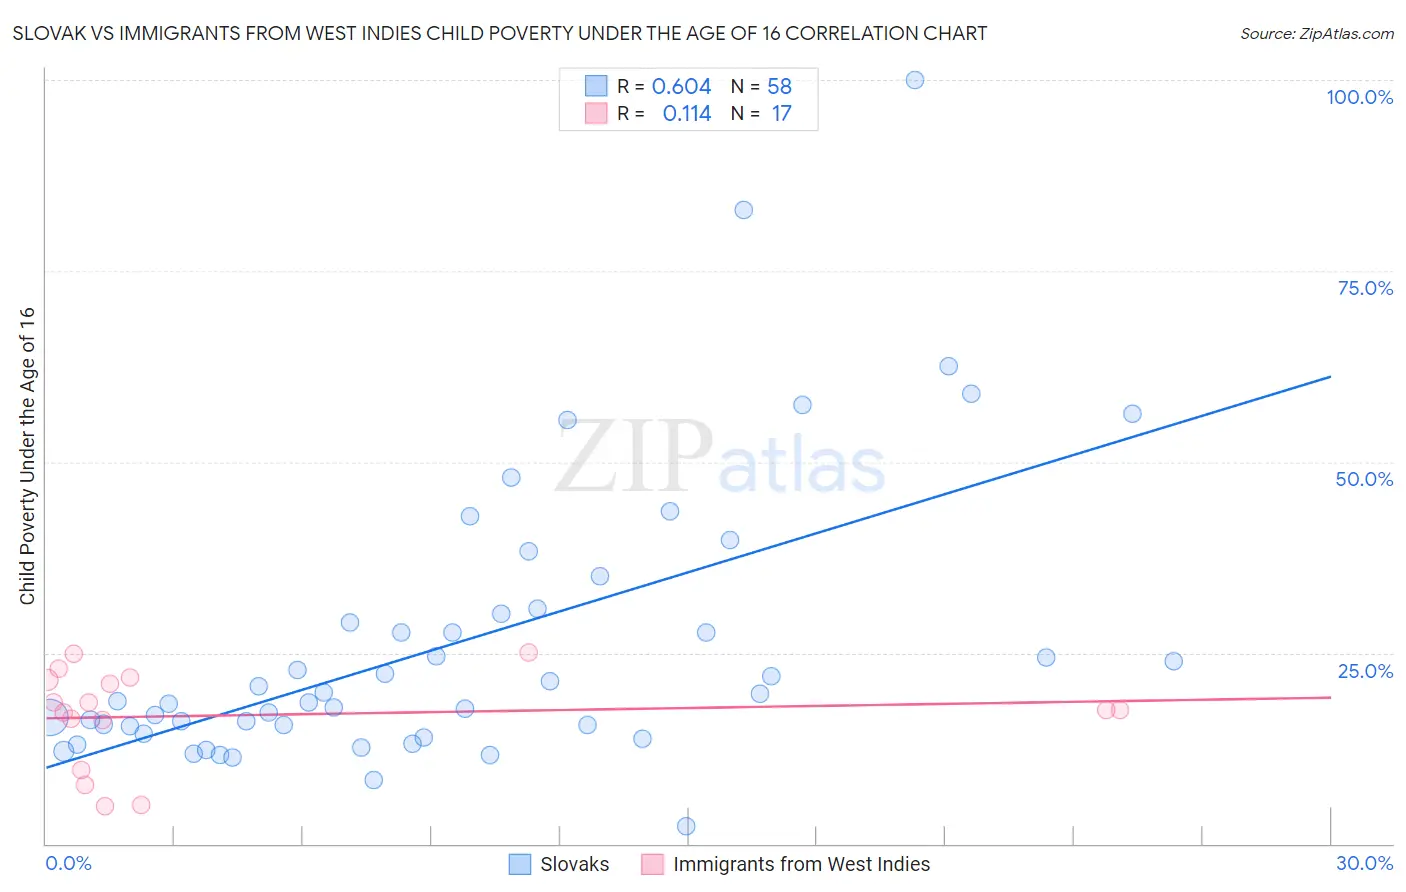 Slovak vs Immigrants from West Indies Child Poverty Under the Age of 16